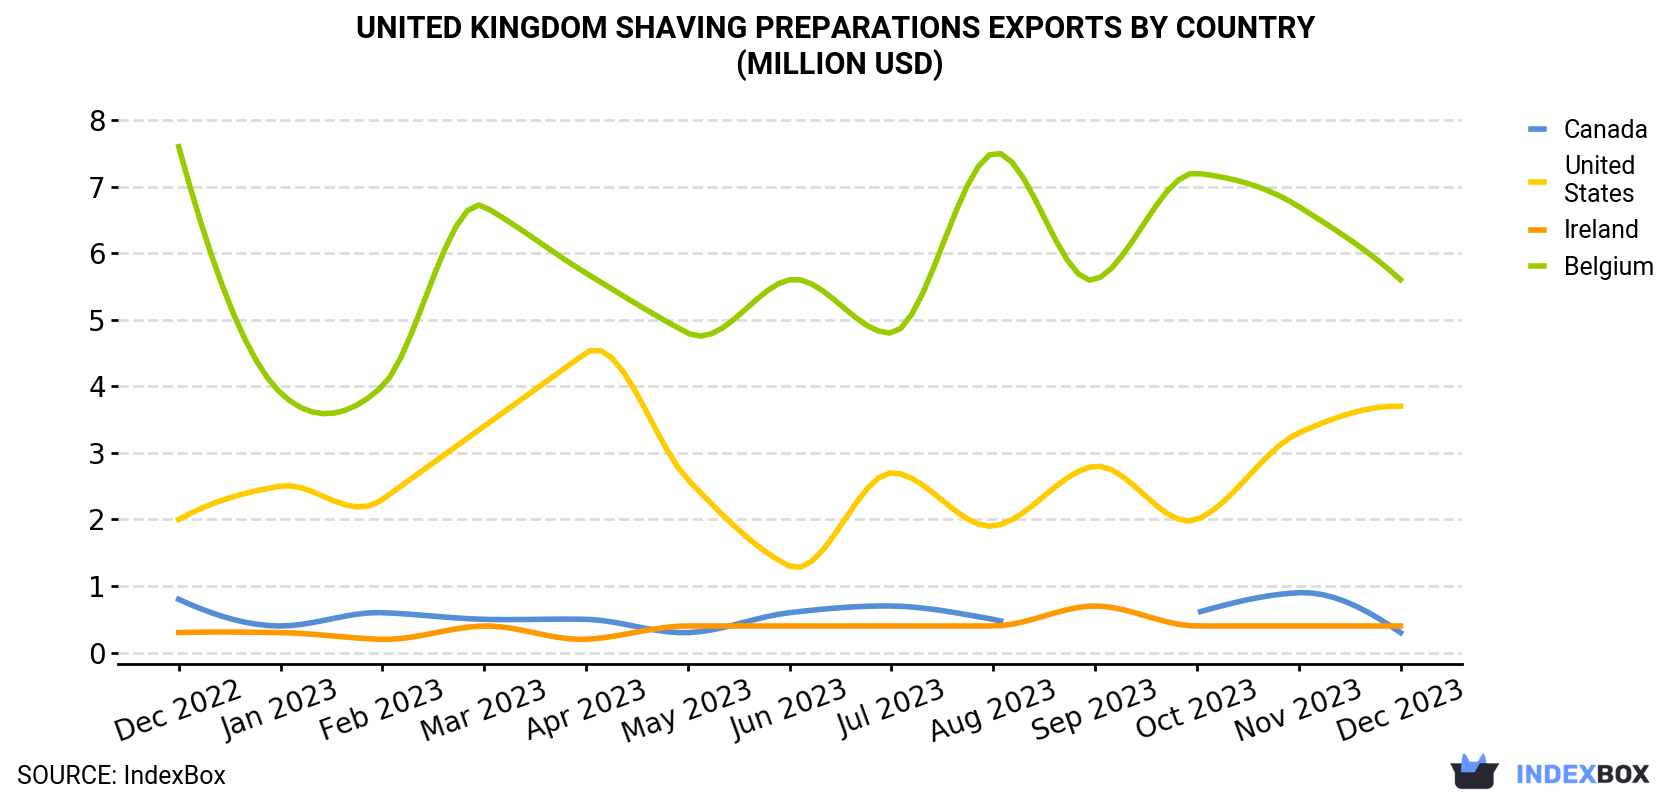 United Kingdom Shaving Preparations Exports By Country (Million USD)